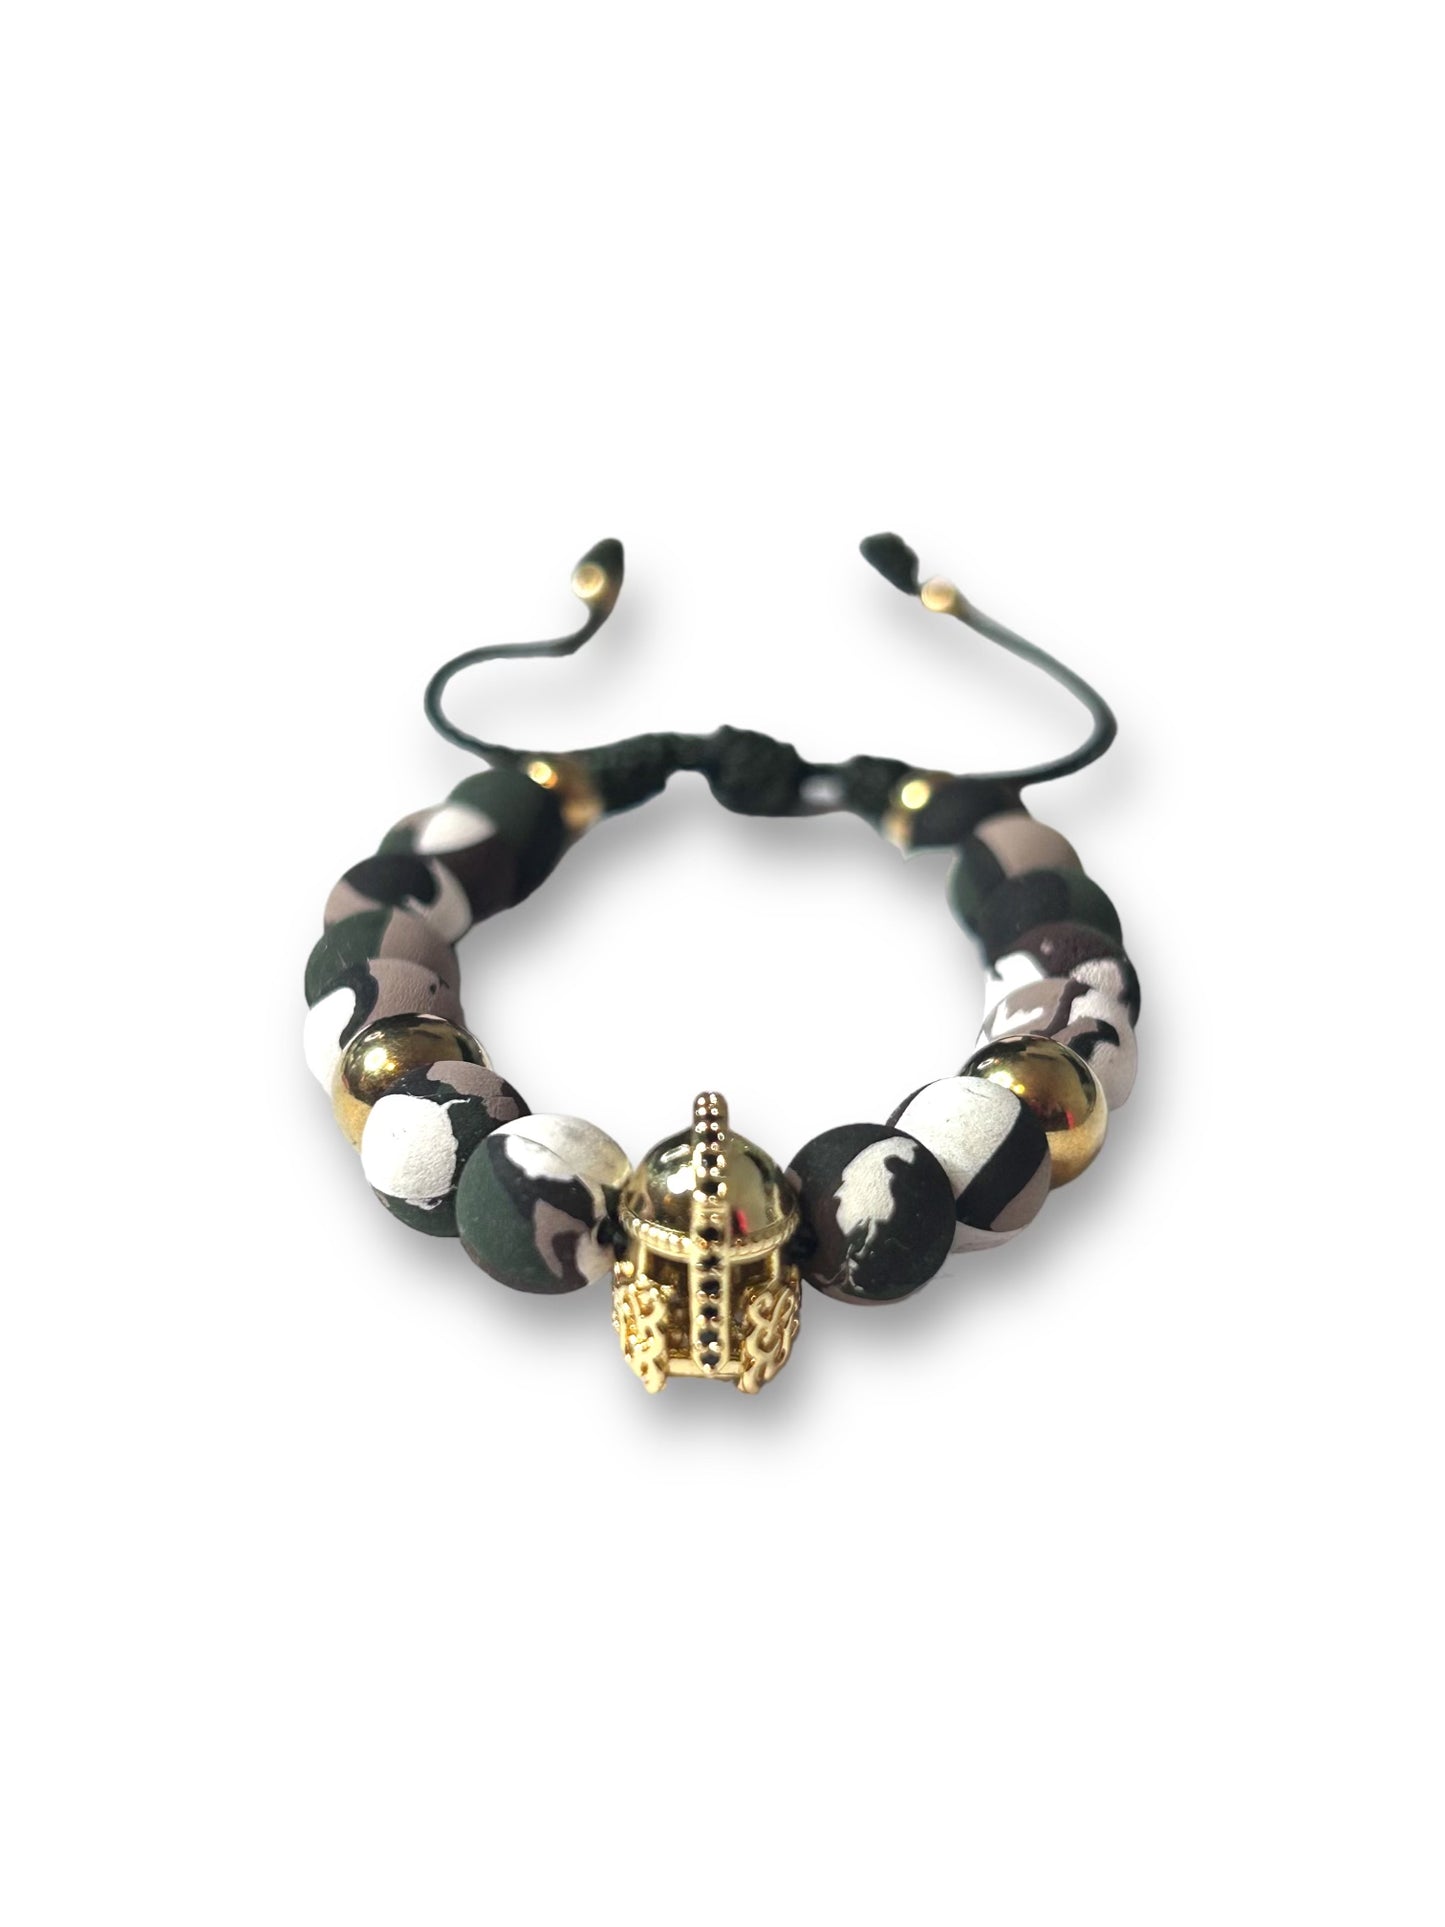 Gold Spartan Helmet with Camo Beads Necklace